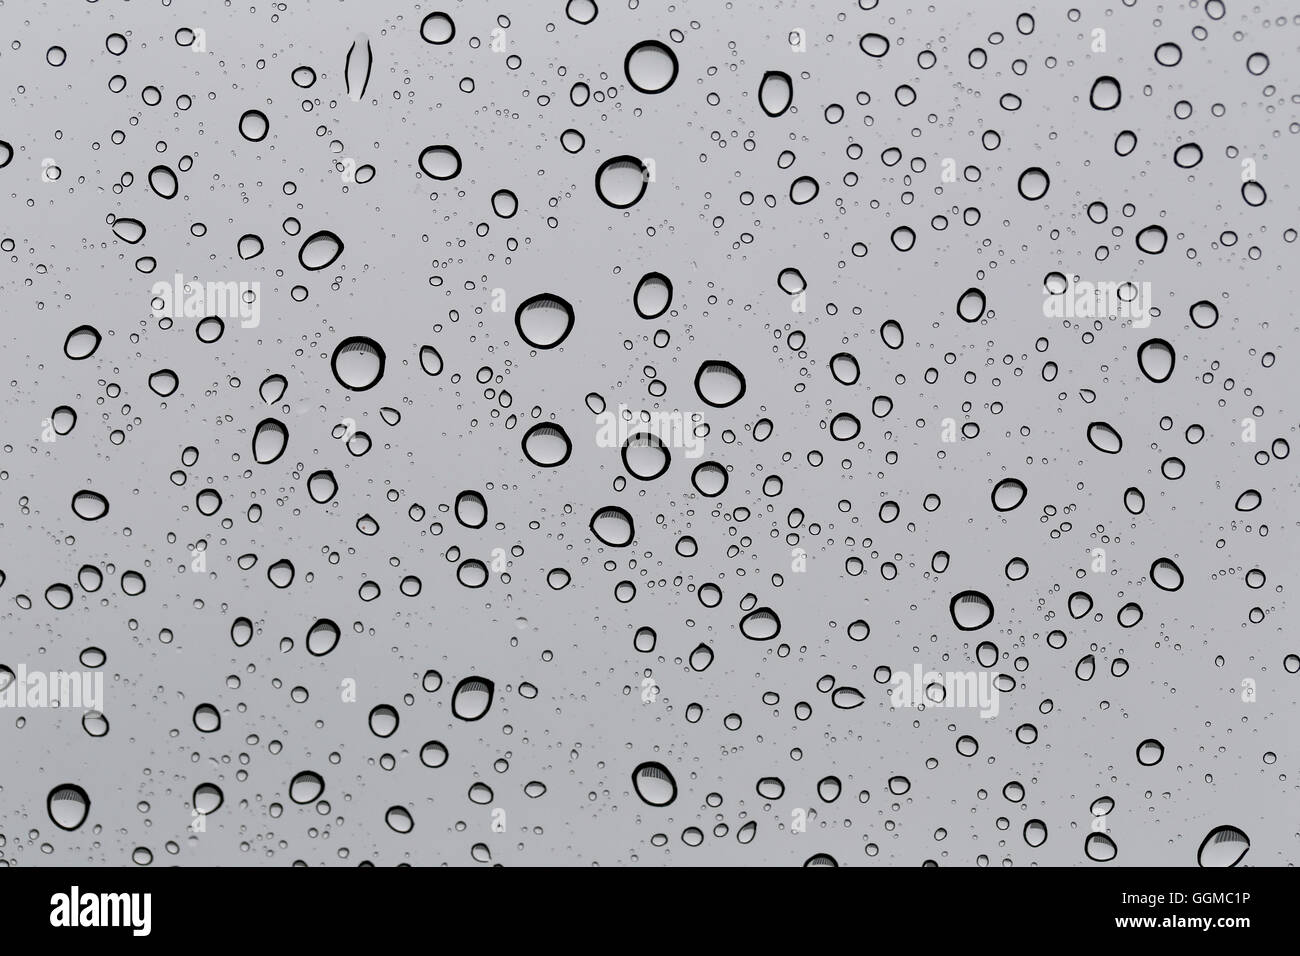 Drop of water for the background on glass car window to abstract design and nature backdrop. Stock Photo